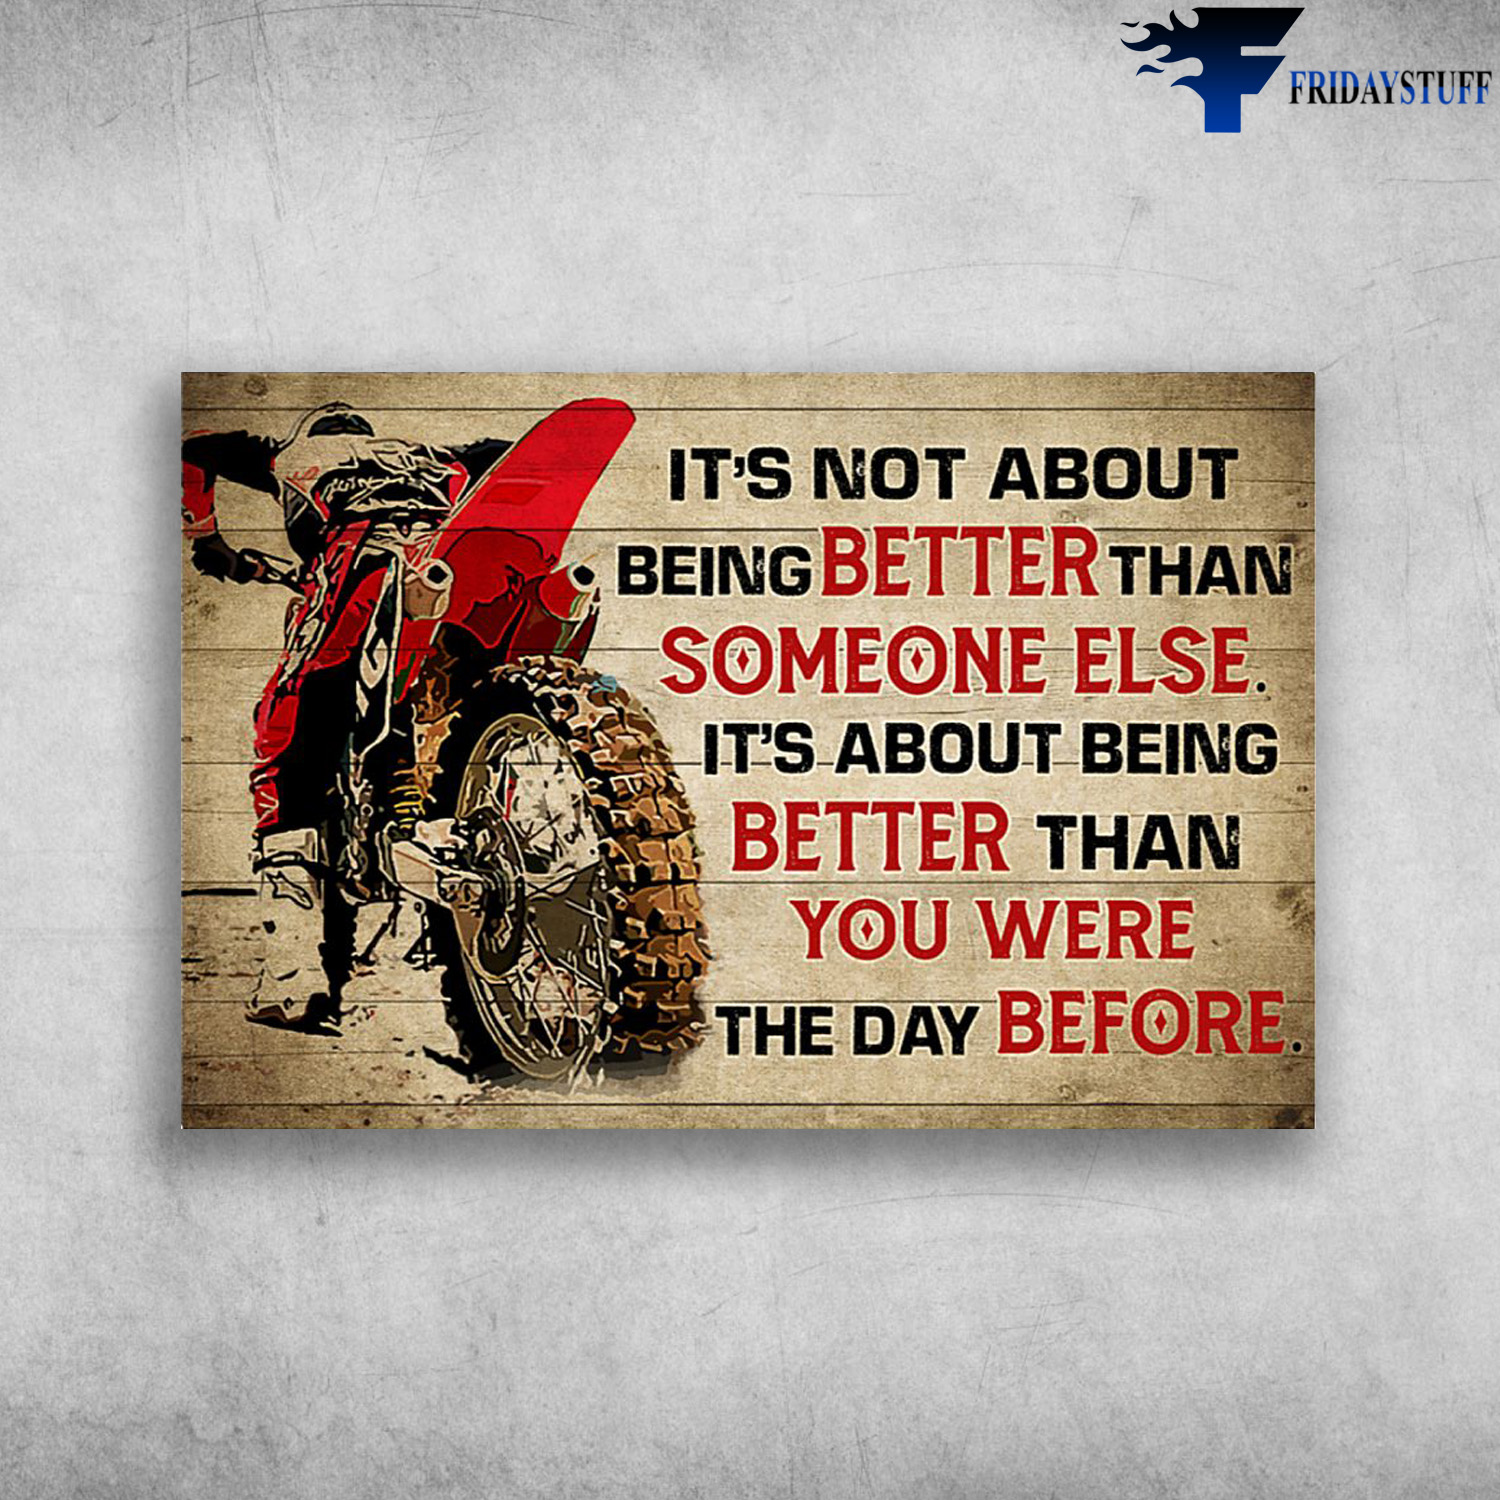 Motocross Man - It's Not About Being Better Than Someone Else, It's About Being Better Than Yu Were The Day Before